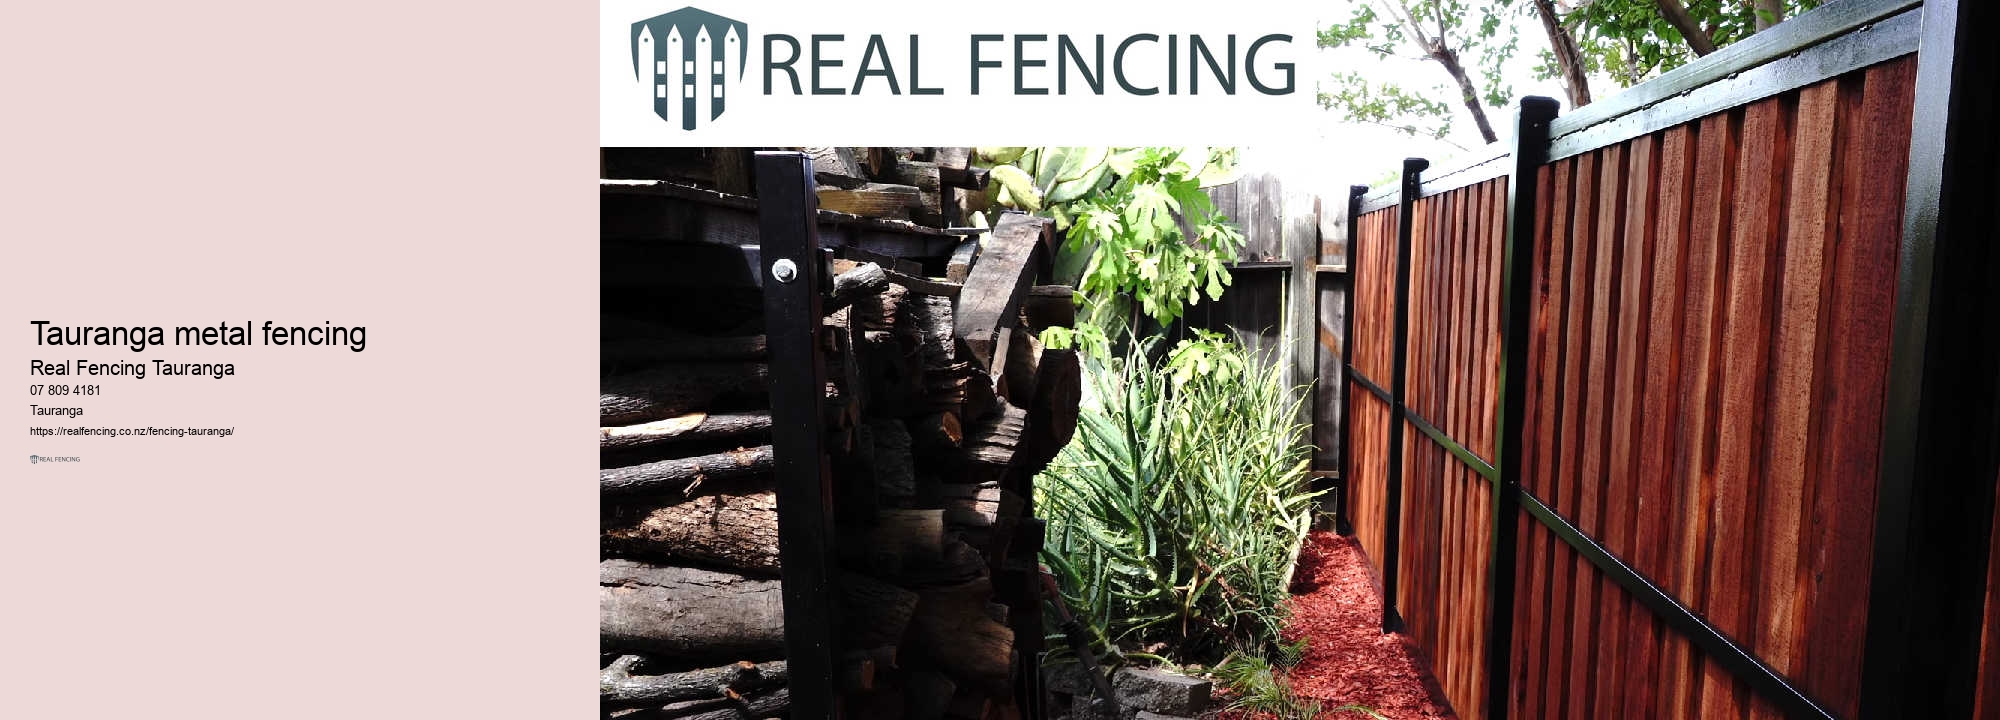 Fencing and gates